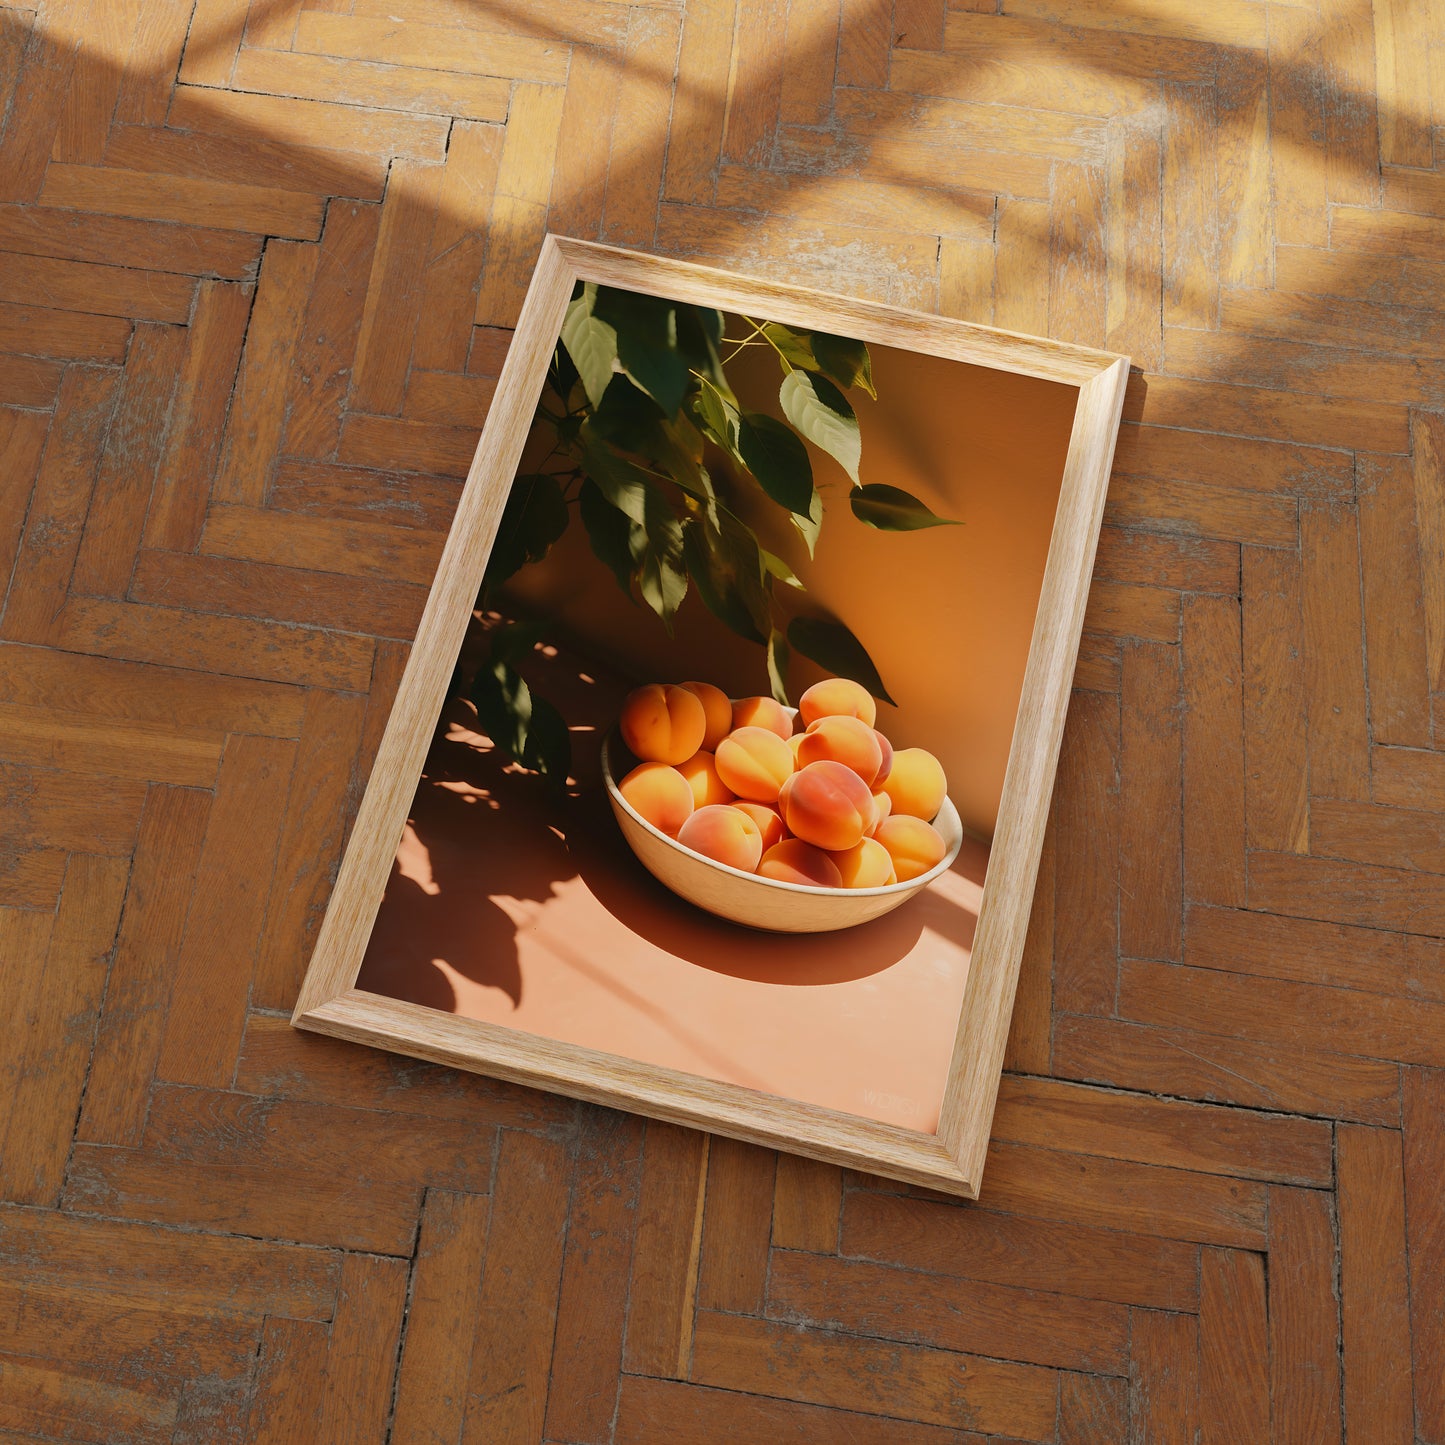 A framed picture of a bowl of apricots on a floor with herringbone pattern wood.